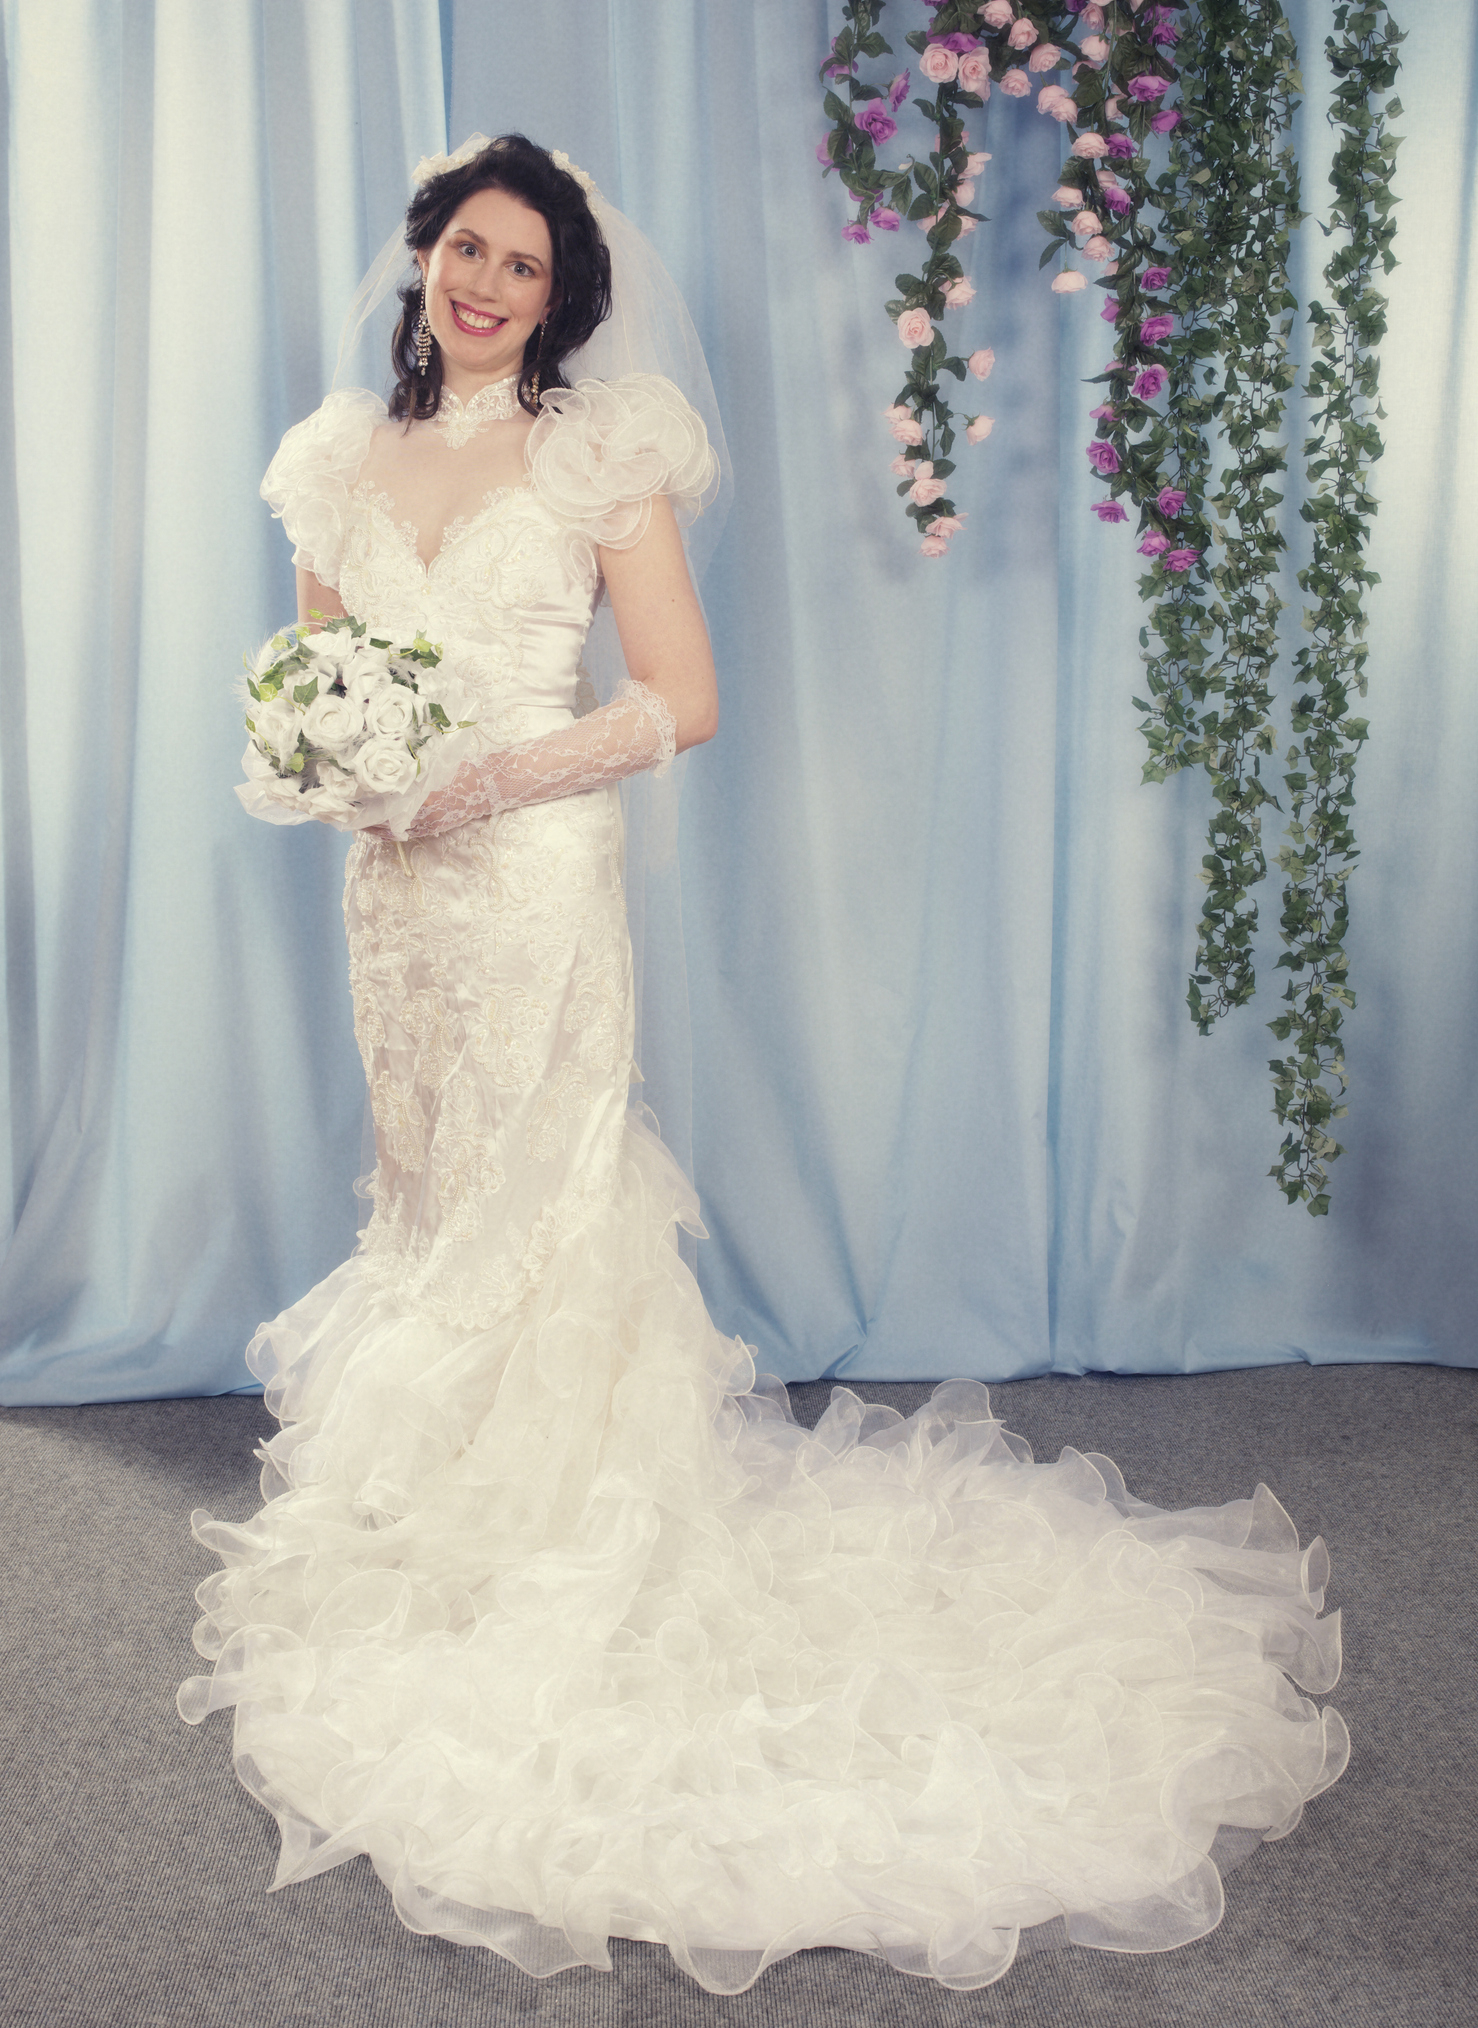 Woman in an embellished wedding dress with voluminous sleeves and a flowing train holds a bouquet